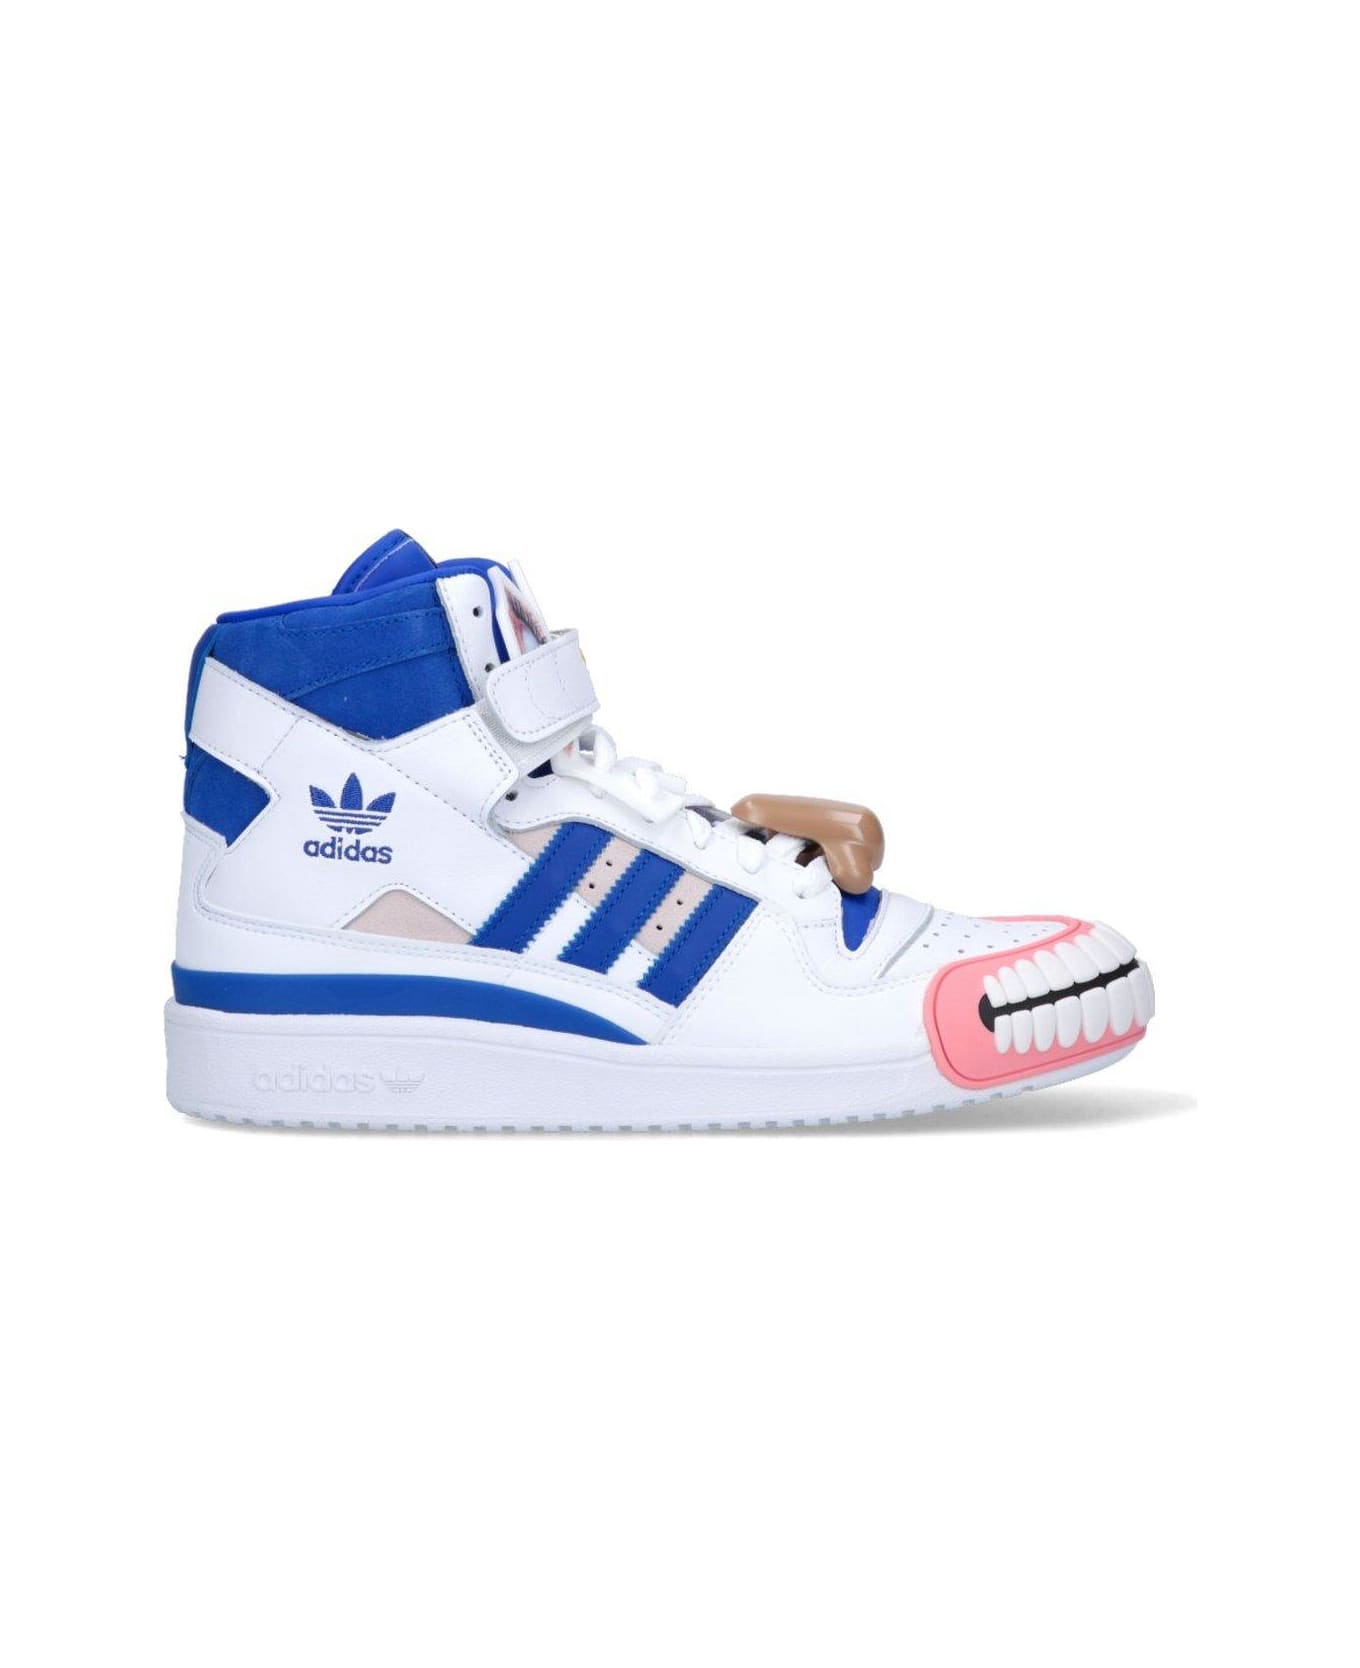 Adidas Forum High X Kerwin Frost High-top Sneakers - White